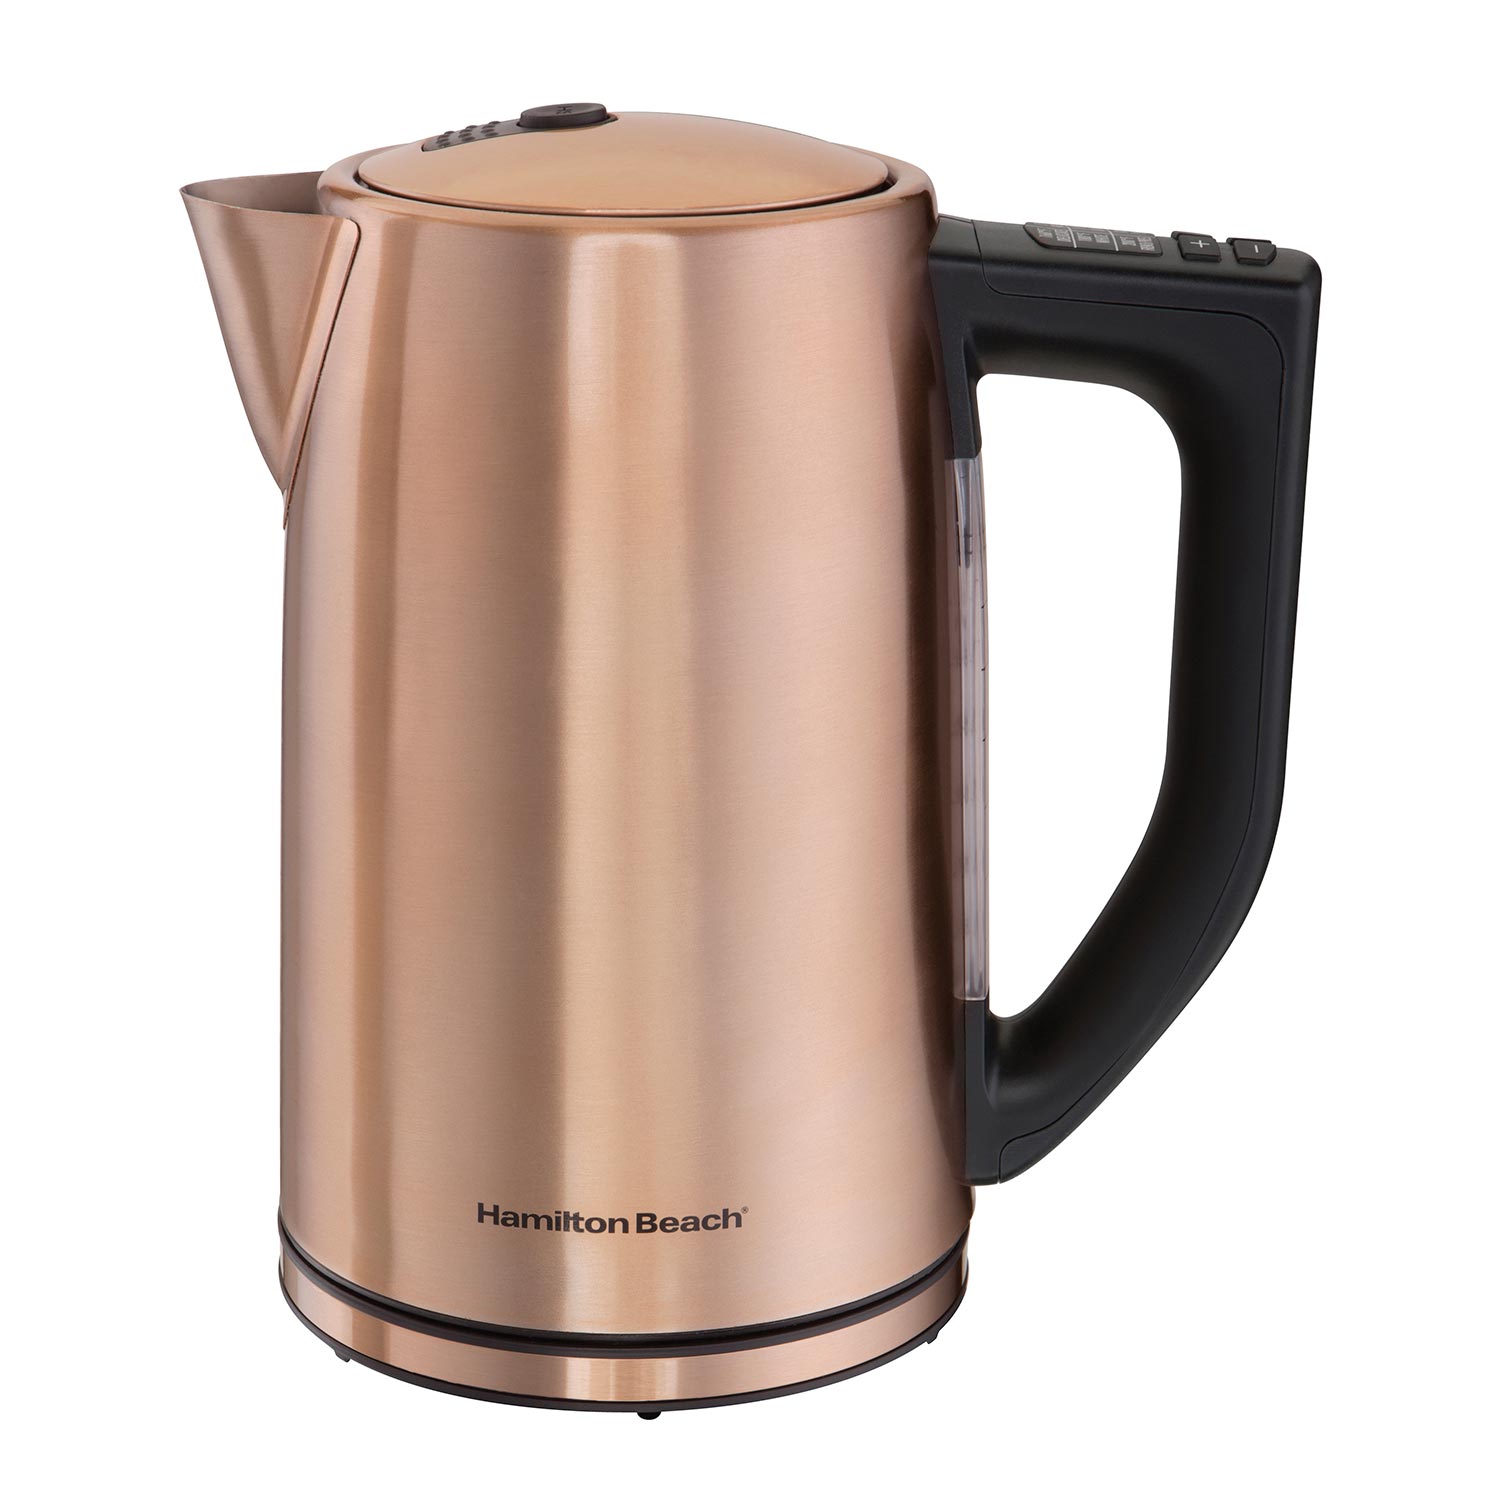 1.7 Liter Variable Temperature Electric Kettle, Copper (41026R)